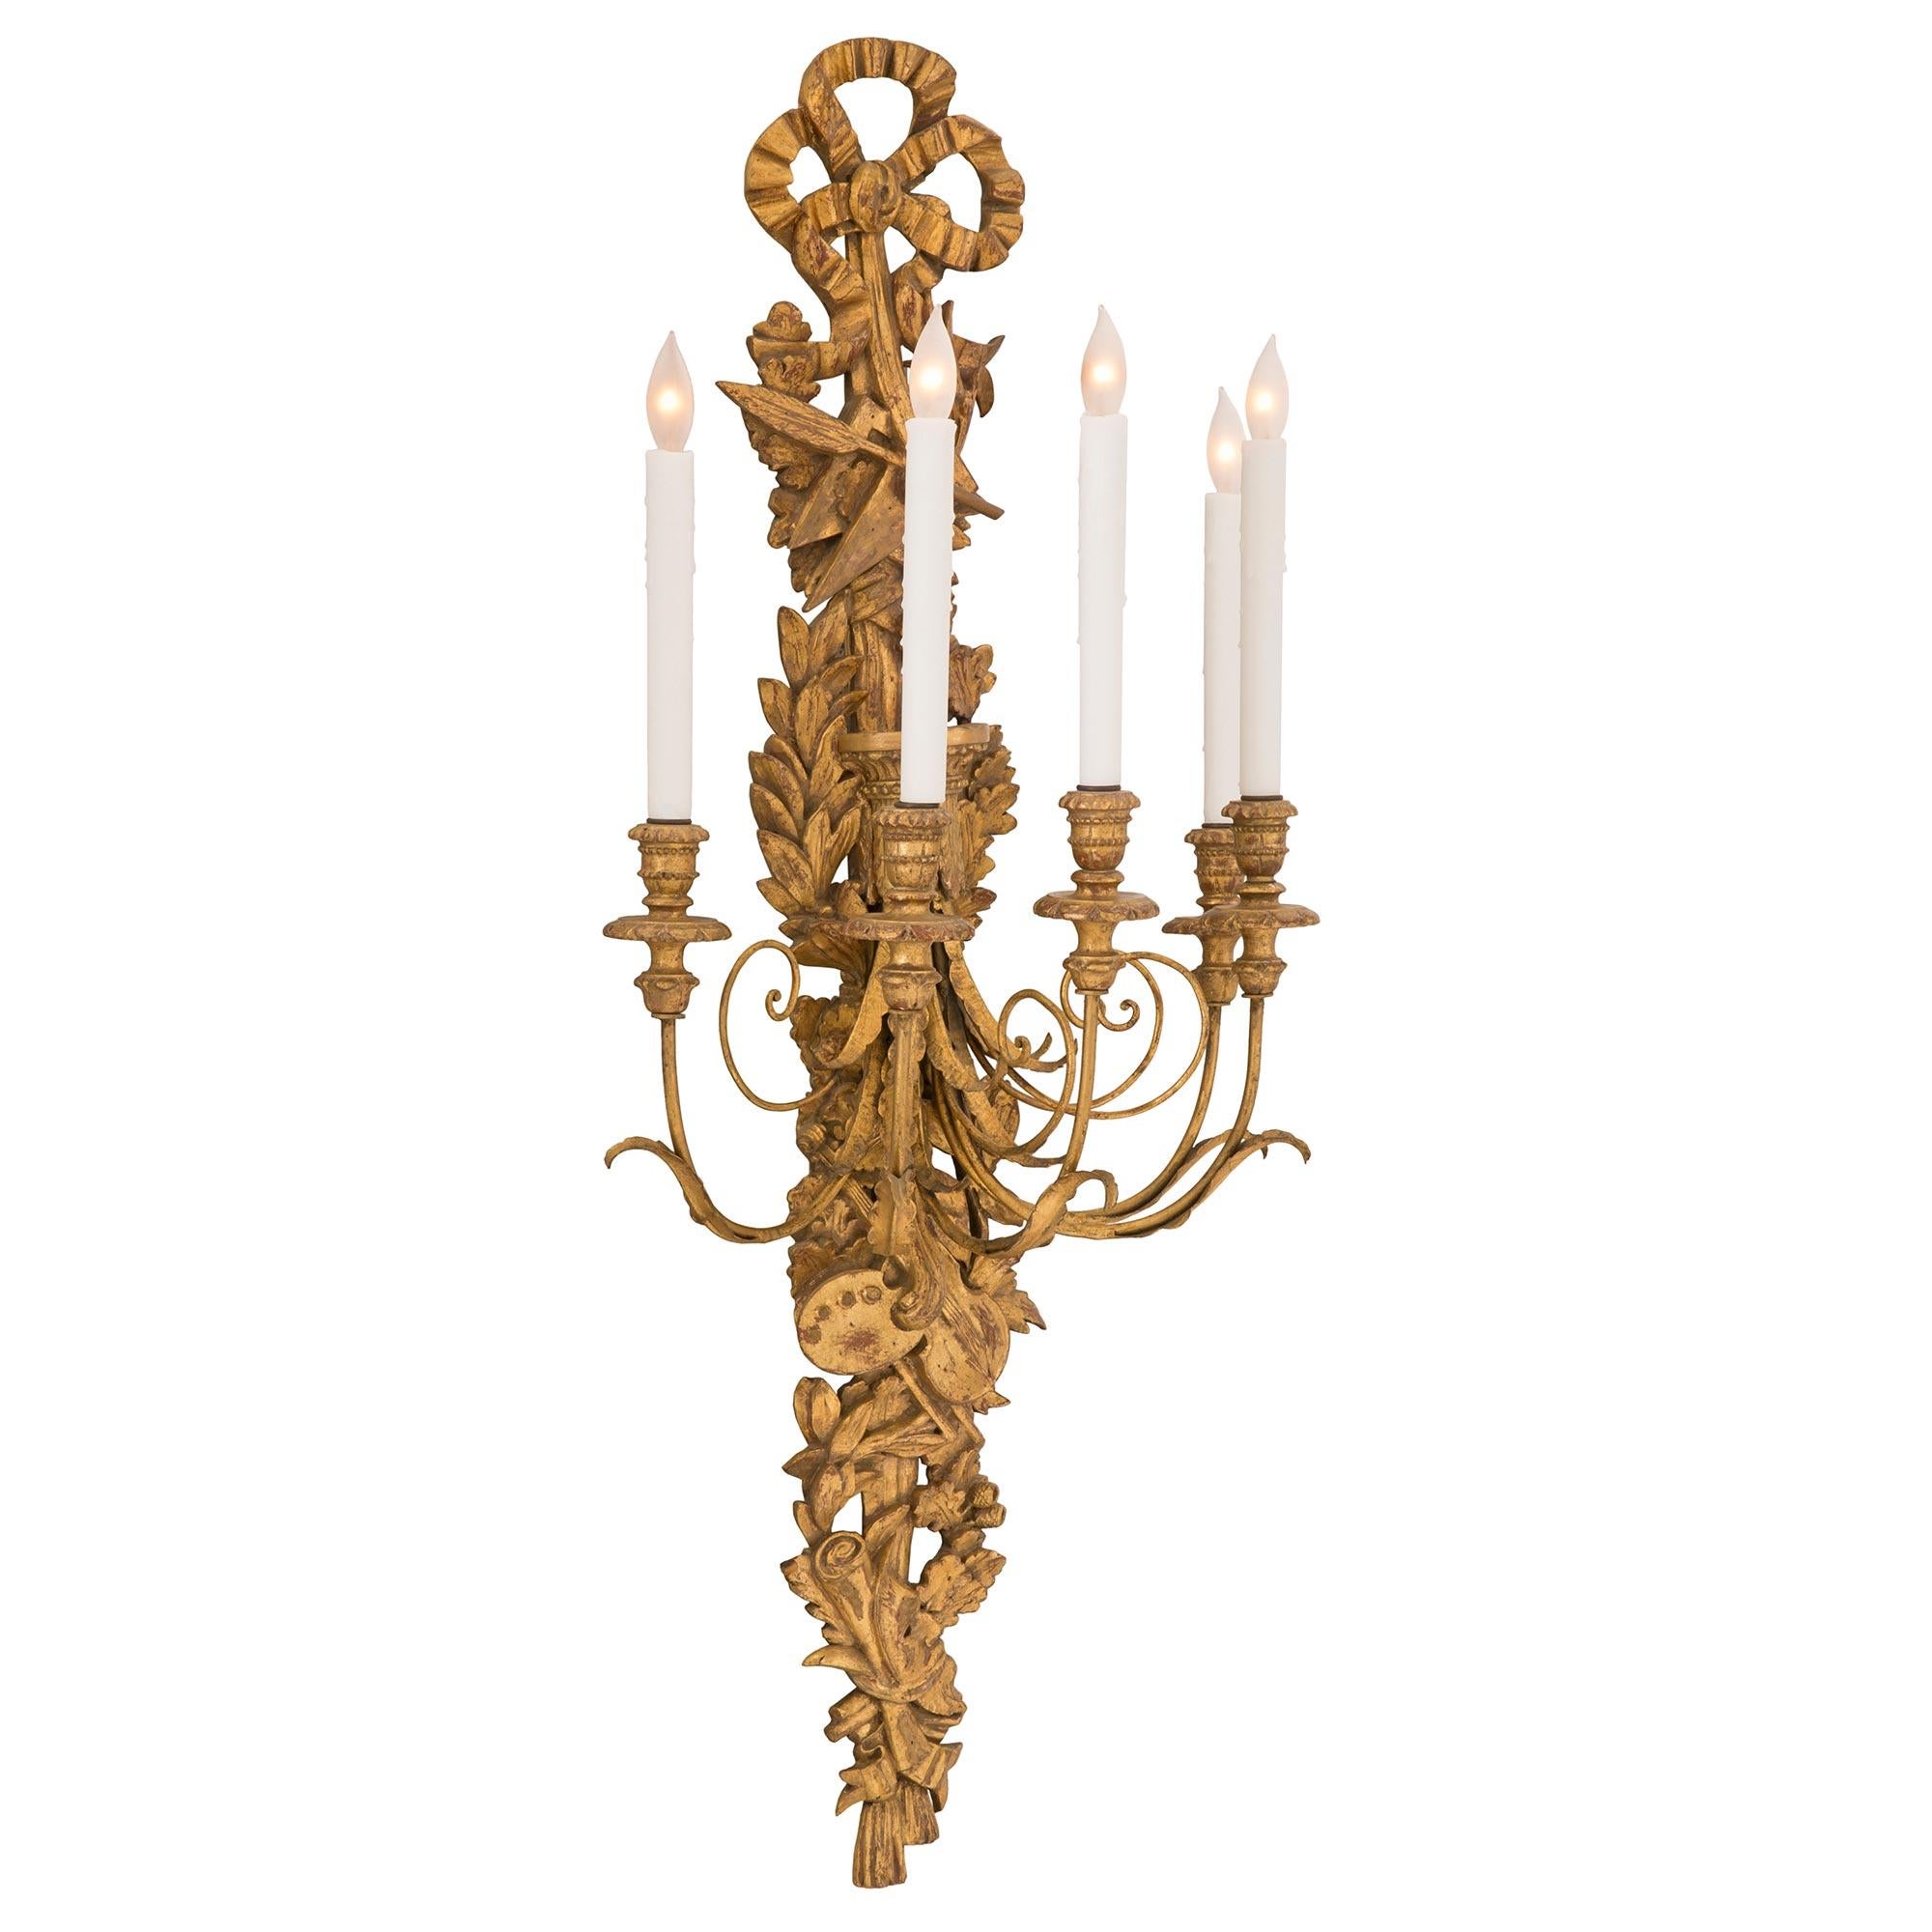 A beautiful and most decorative pair of Italian 19th century Louis XVI st. giltwood sconces. Each five arm giltwood sconce displays a stunning and intricately detailed pierced backplate with charming oak leaves and acorns with scrolled, tassels, a